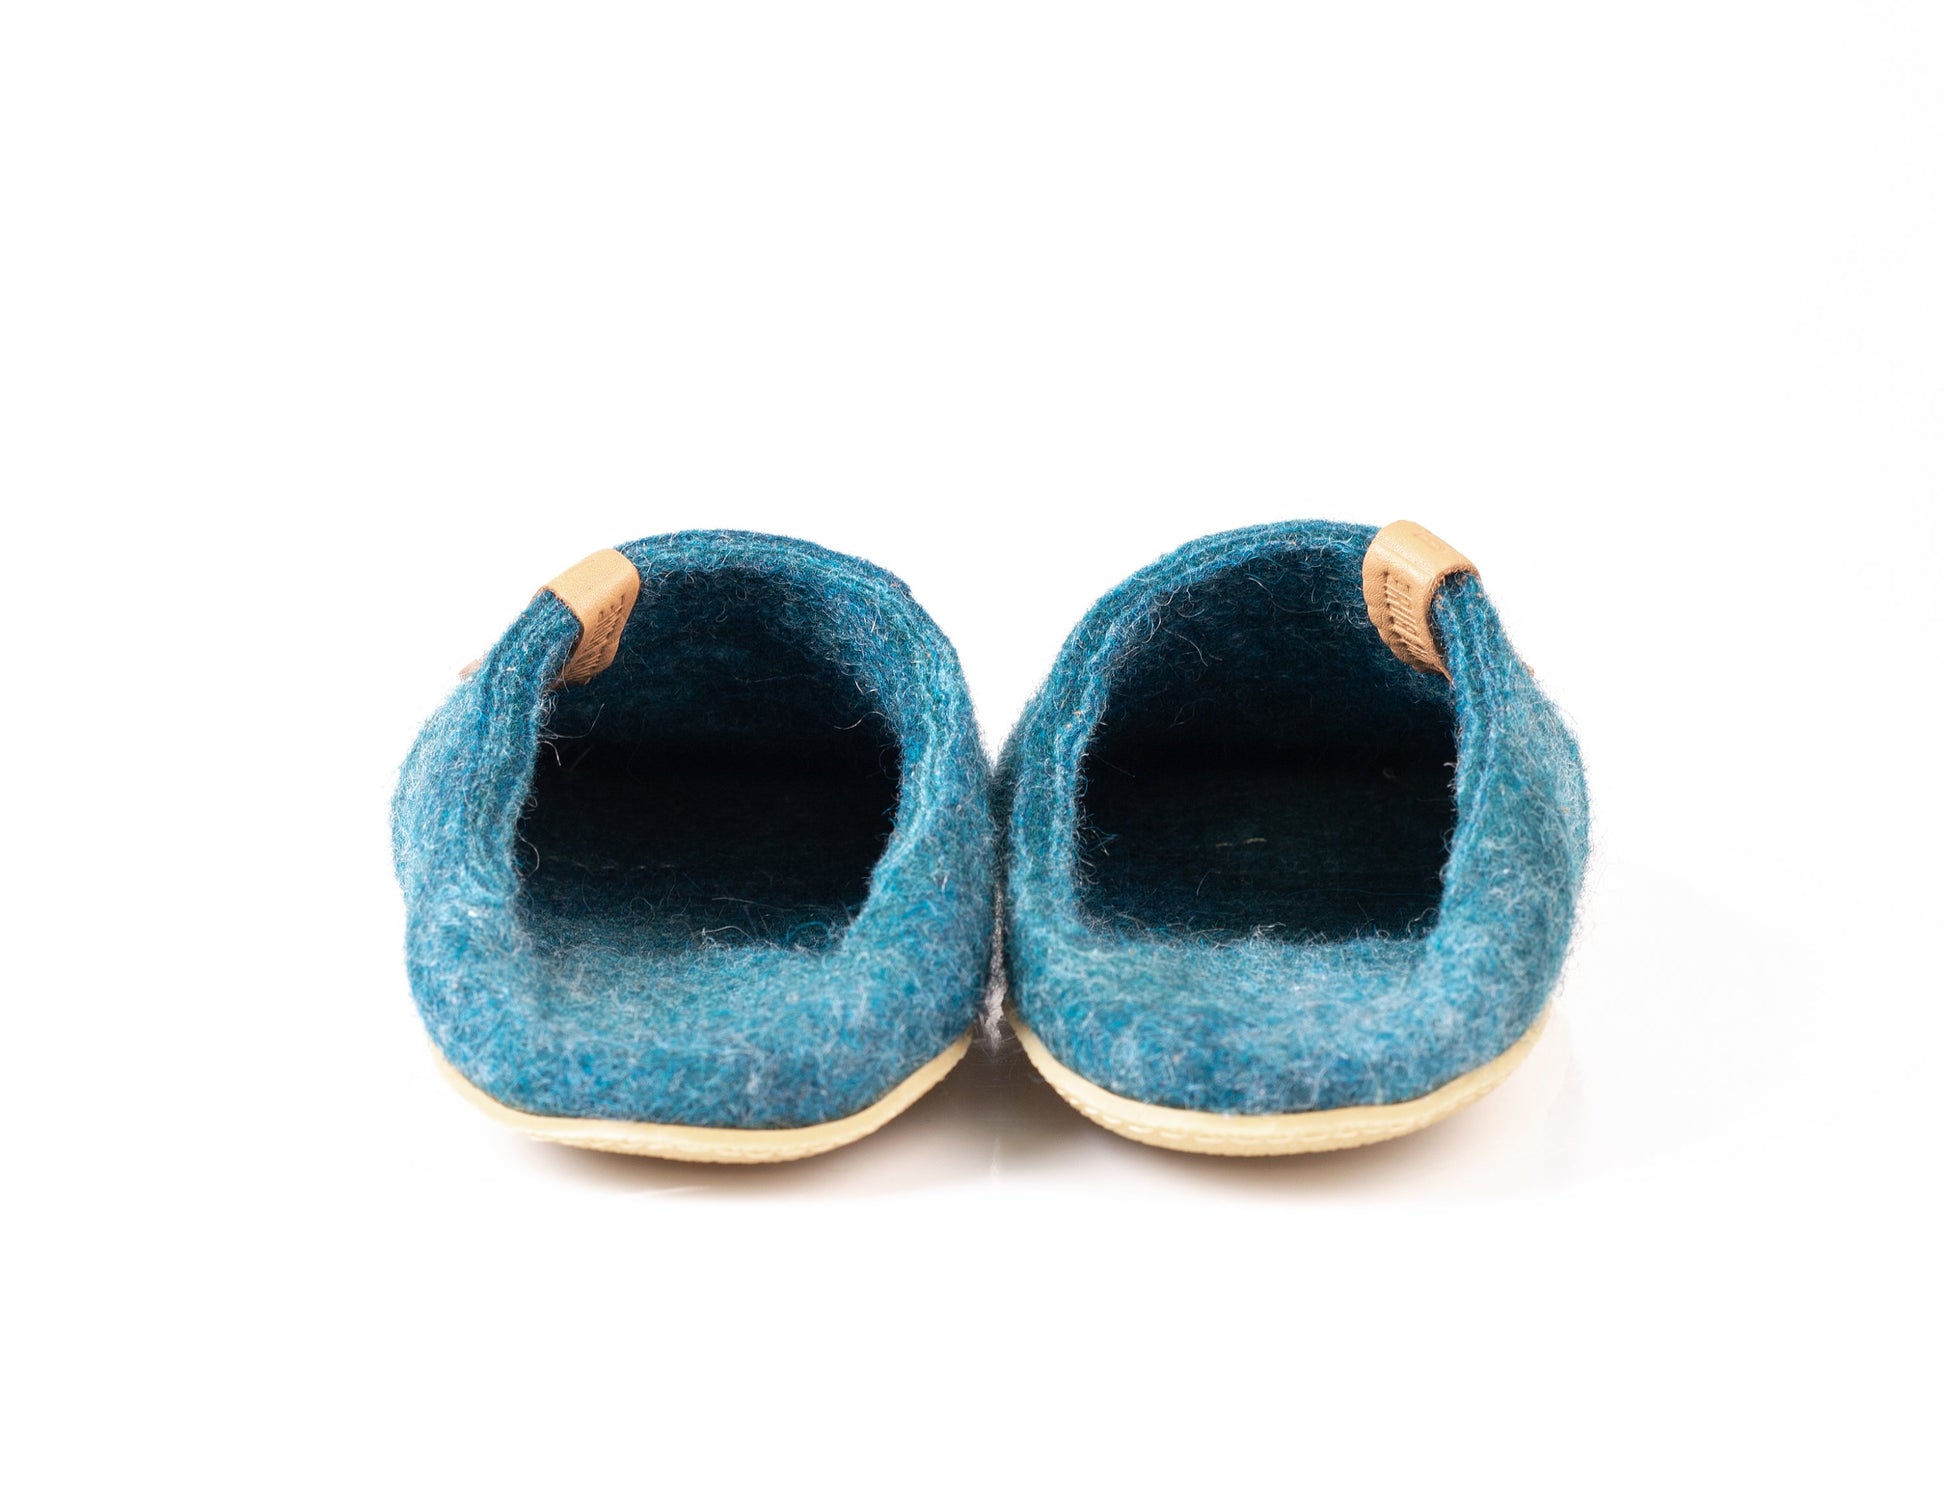 The back of the backless felted wool slippers for men